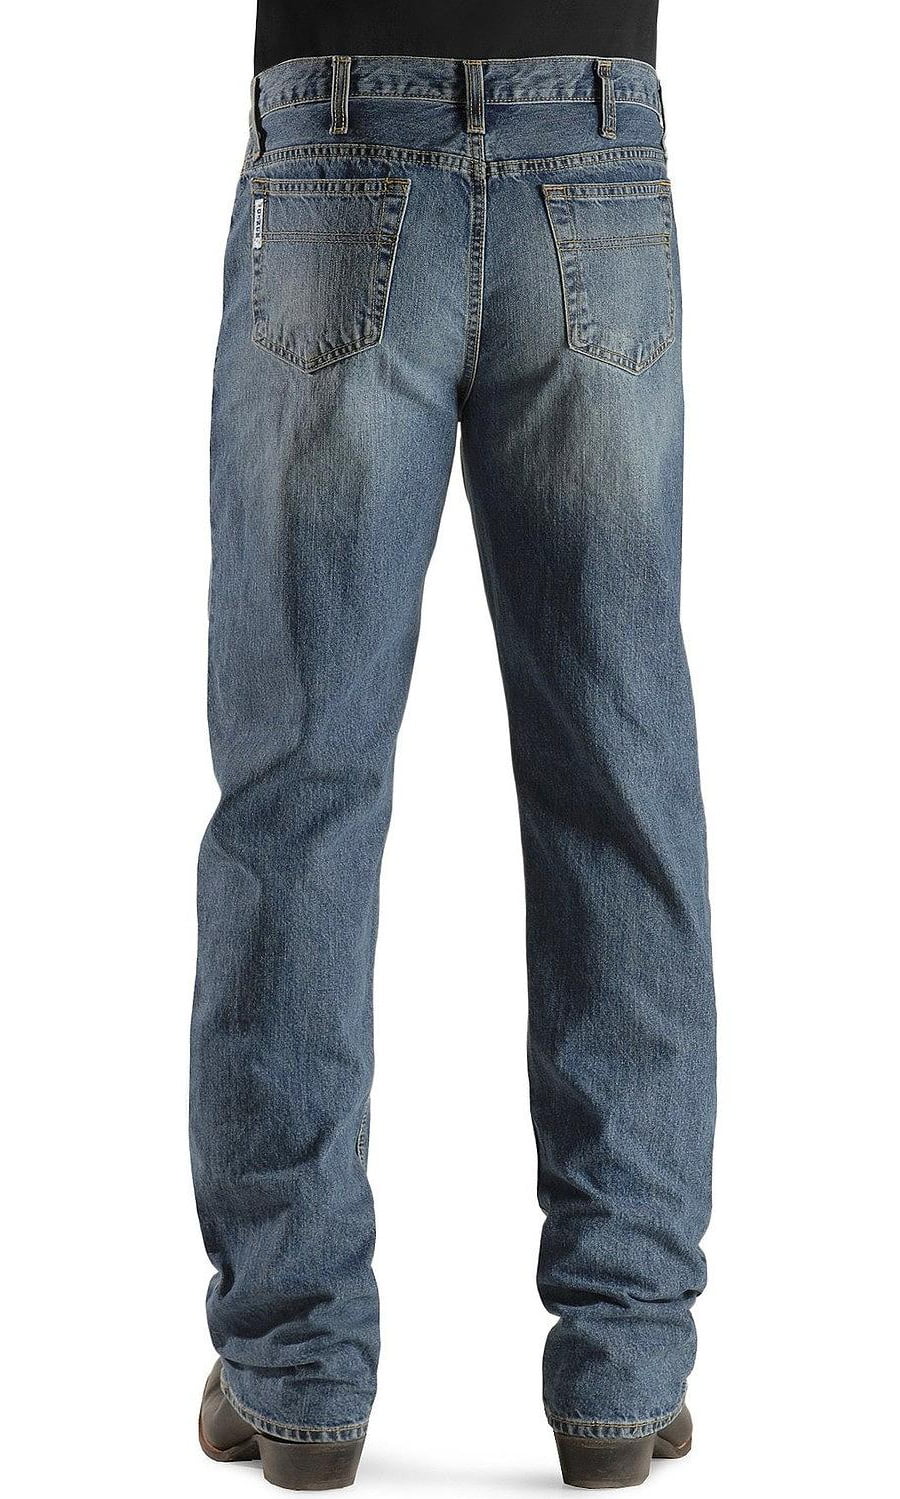 Cinch Mens White Label Relaxed Fit Jean - Walmart.com